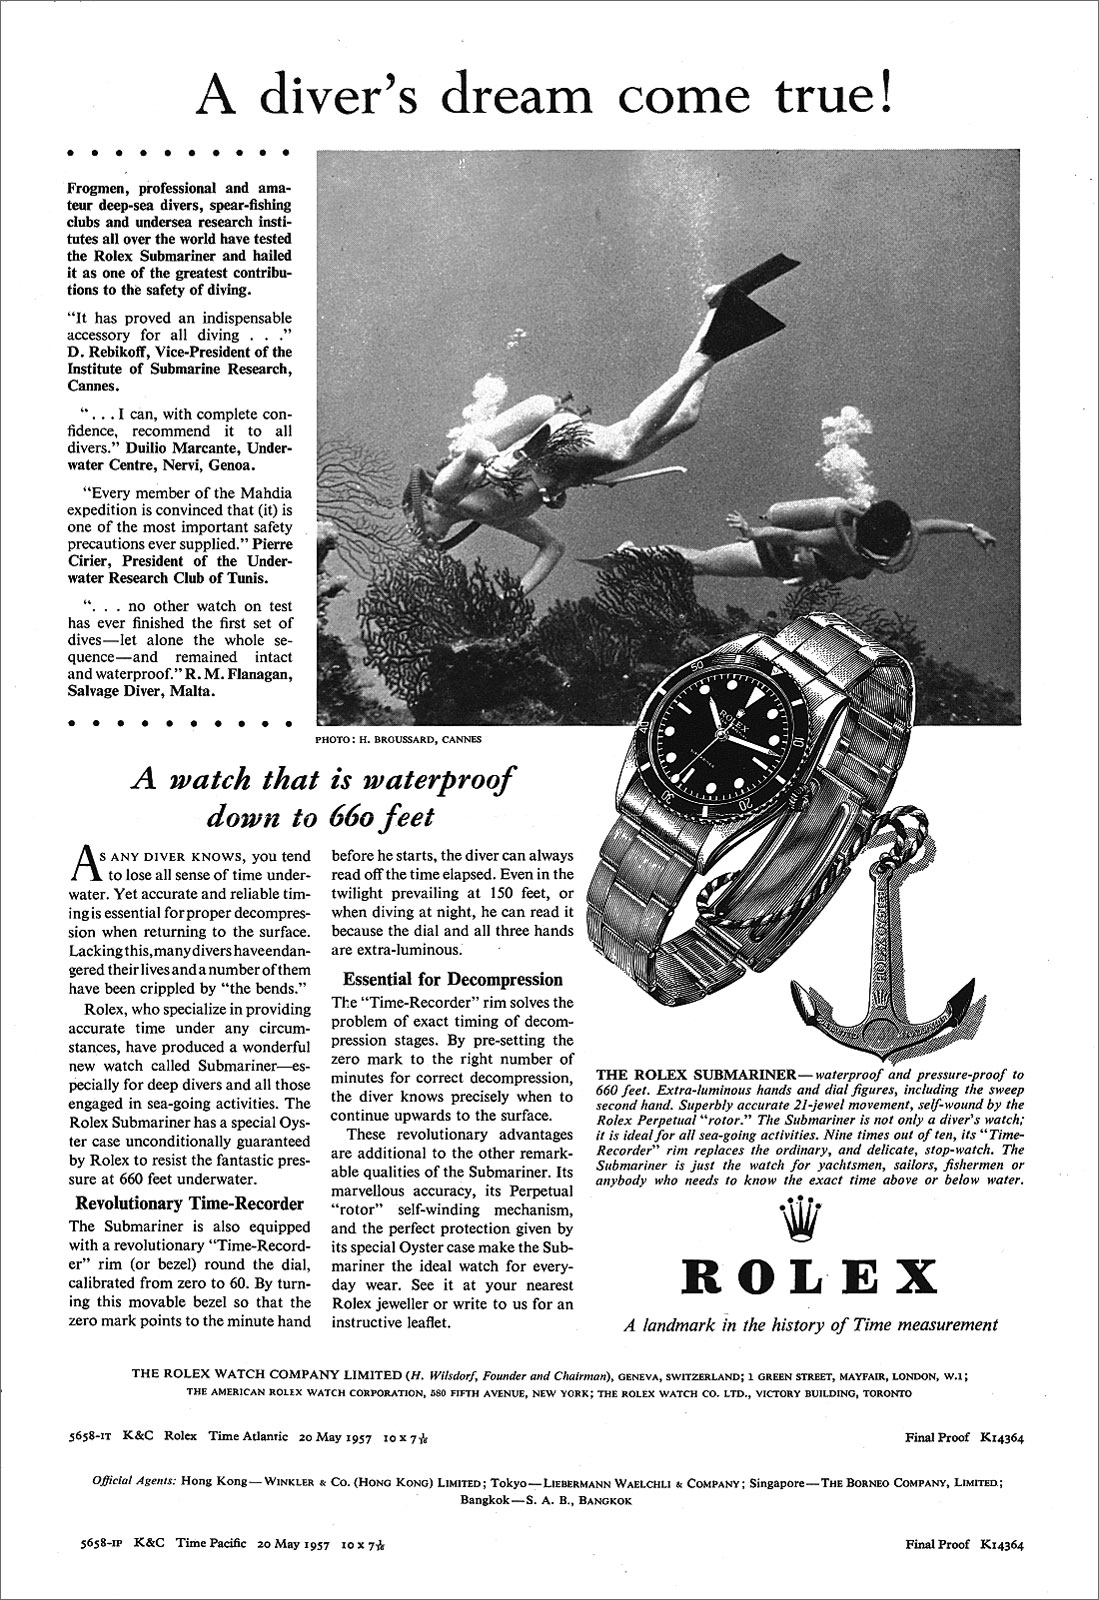 Rolex Submariner went from bulletproof tool watch to stone-cold